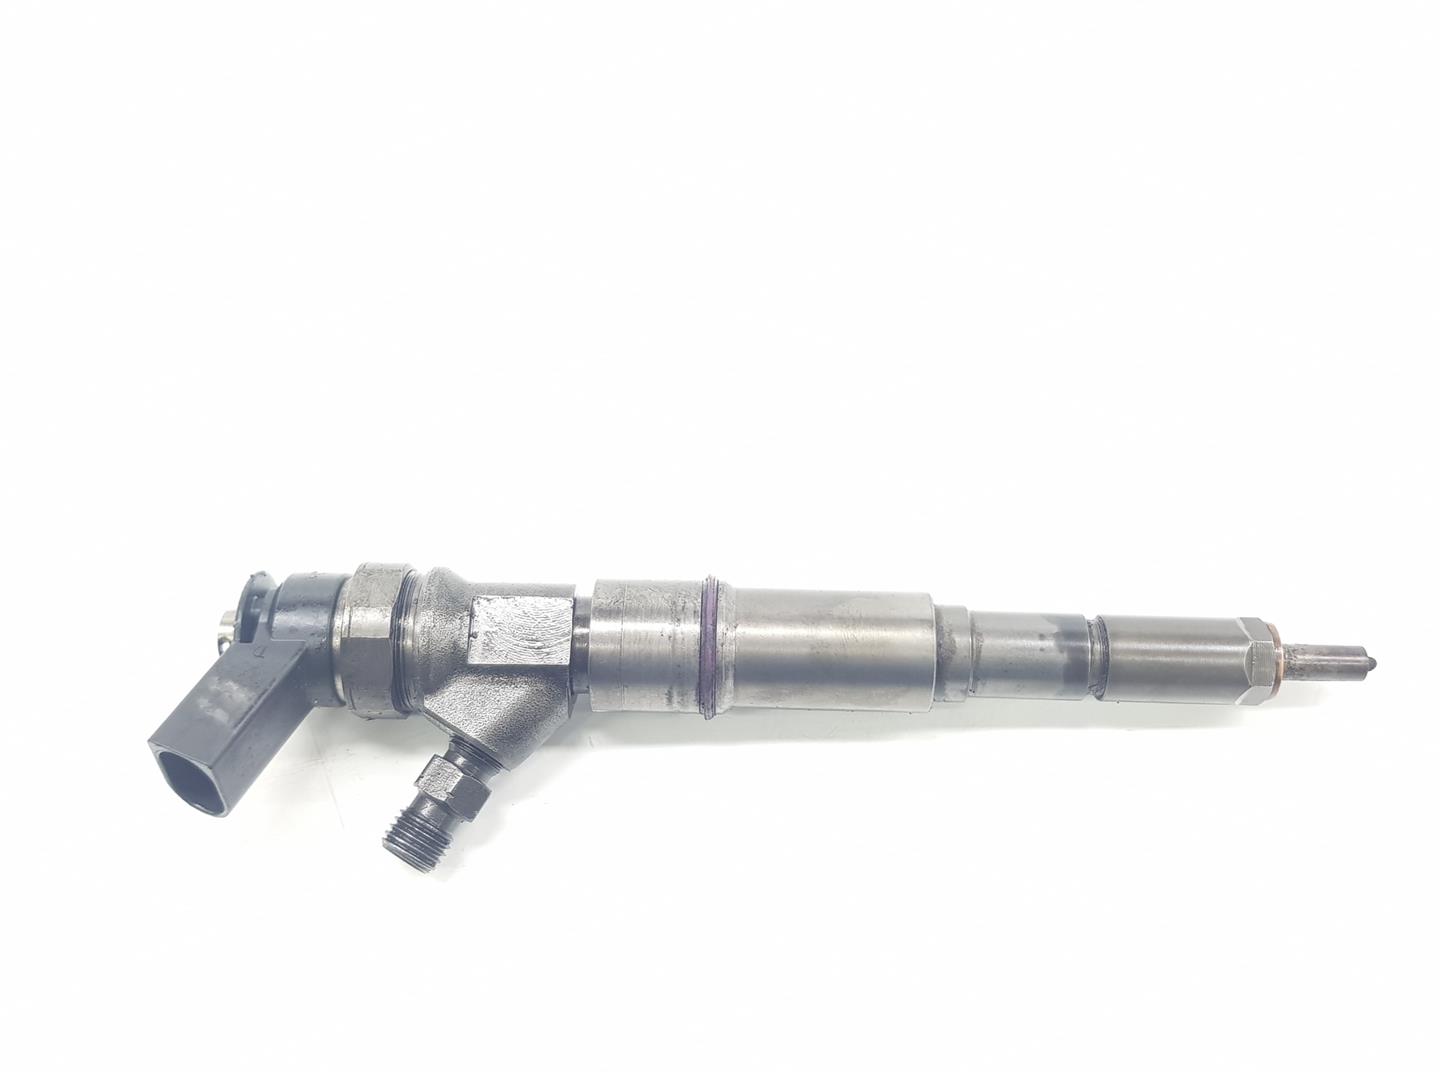 BMW 3 Series E46 (1997-2006) Fuel Injector 13537793836, 13537793836, 1111AA 22963233